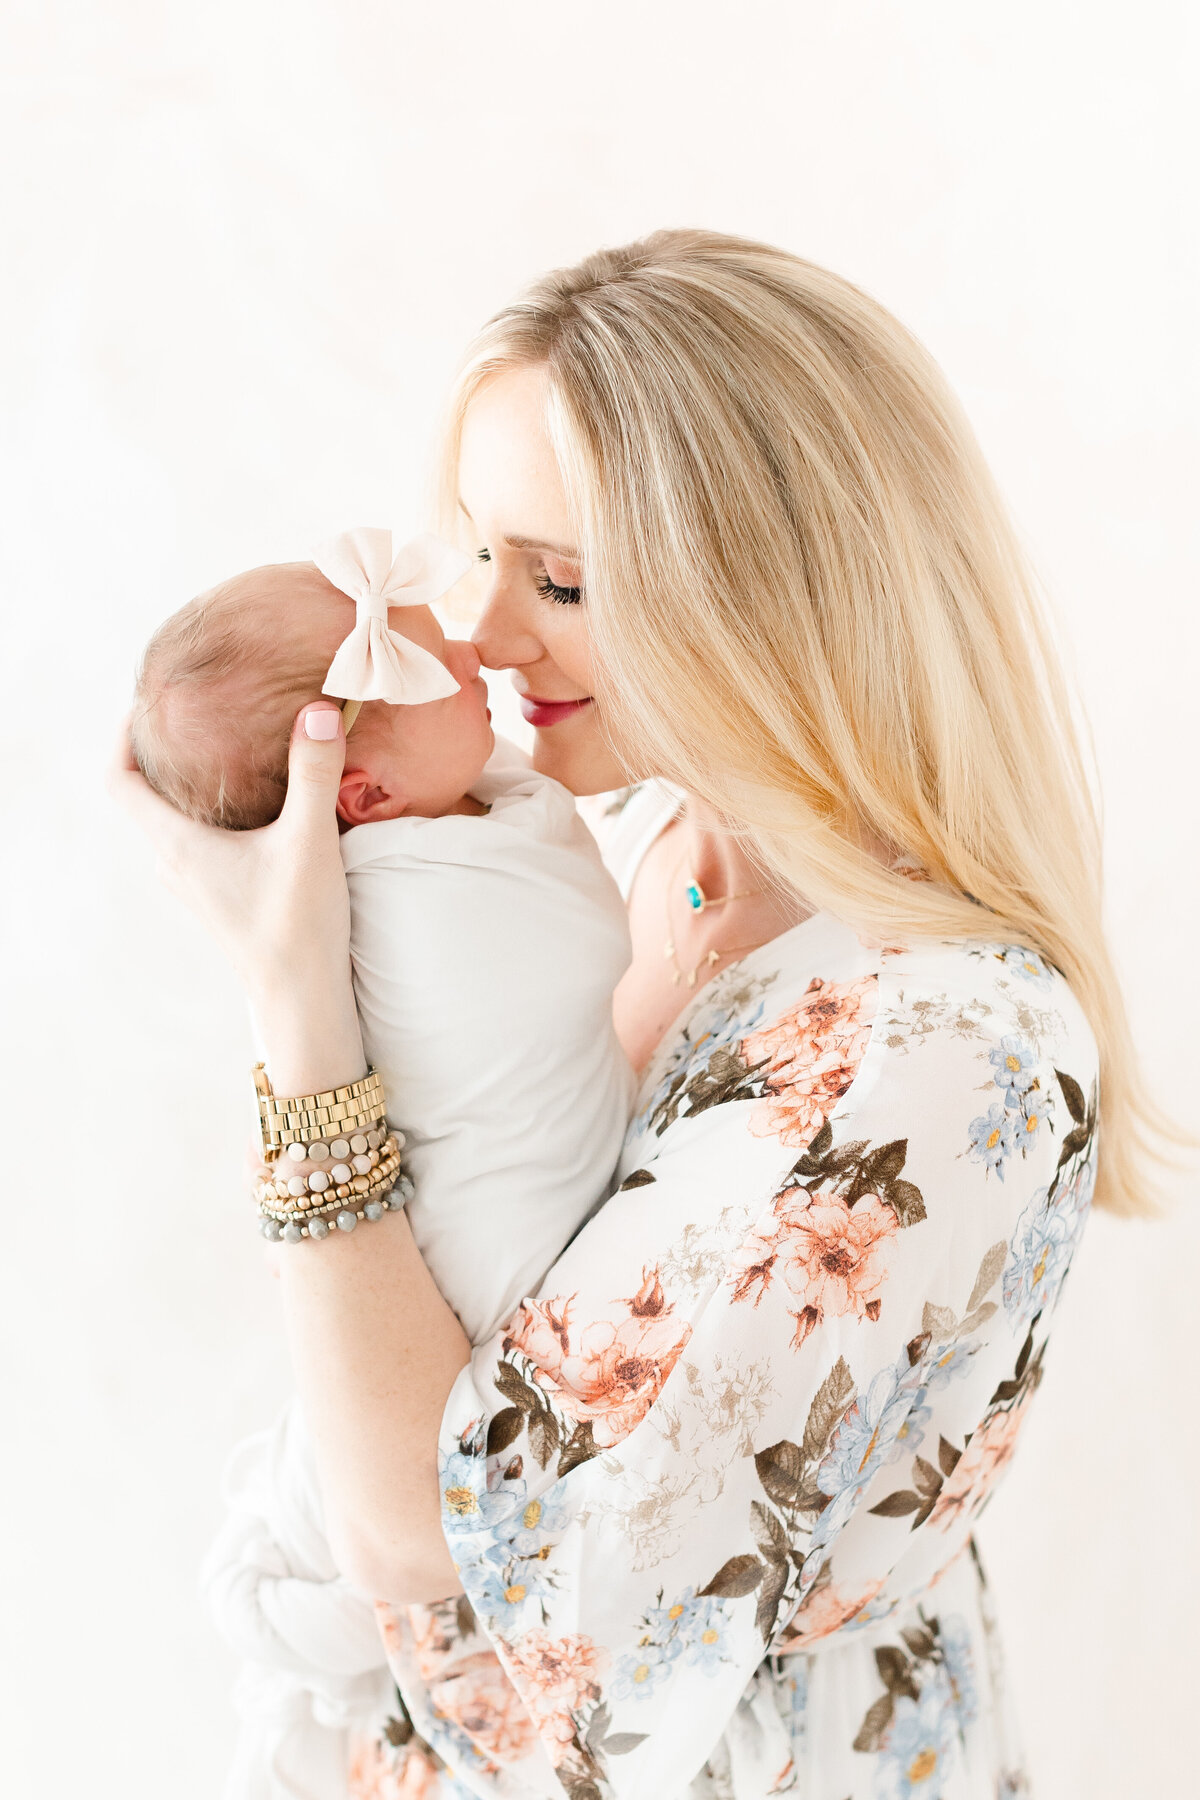 A Northern Virginia Newborn Photography photo of a mama snuggling her baby's nose in the studio